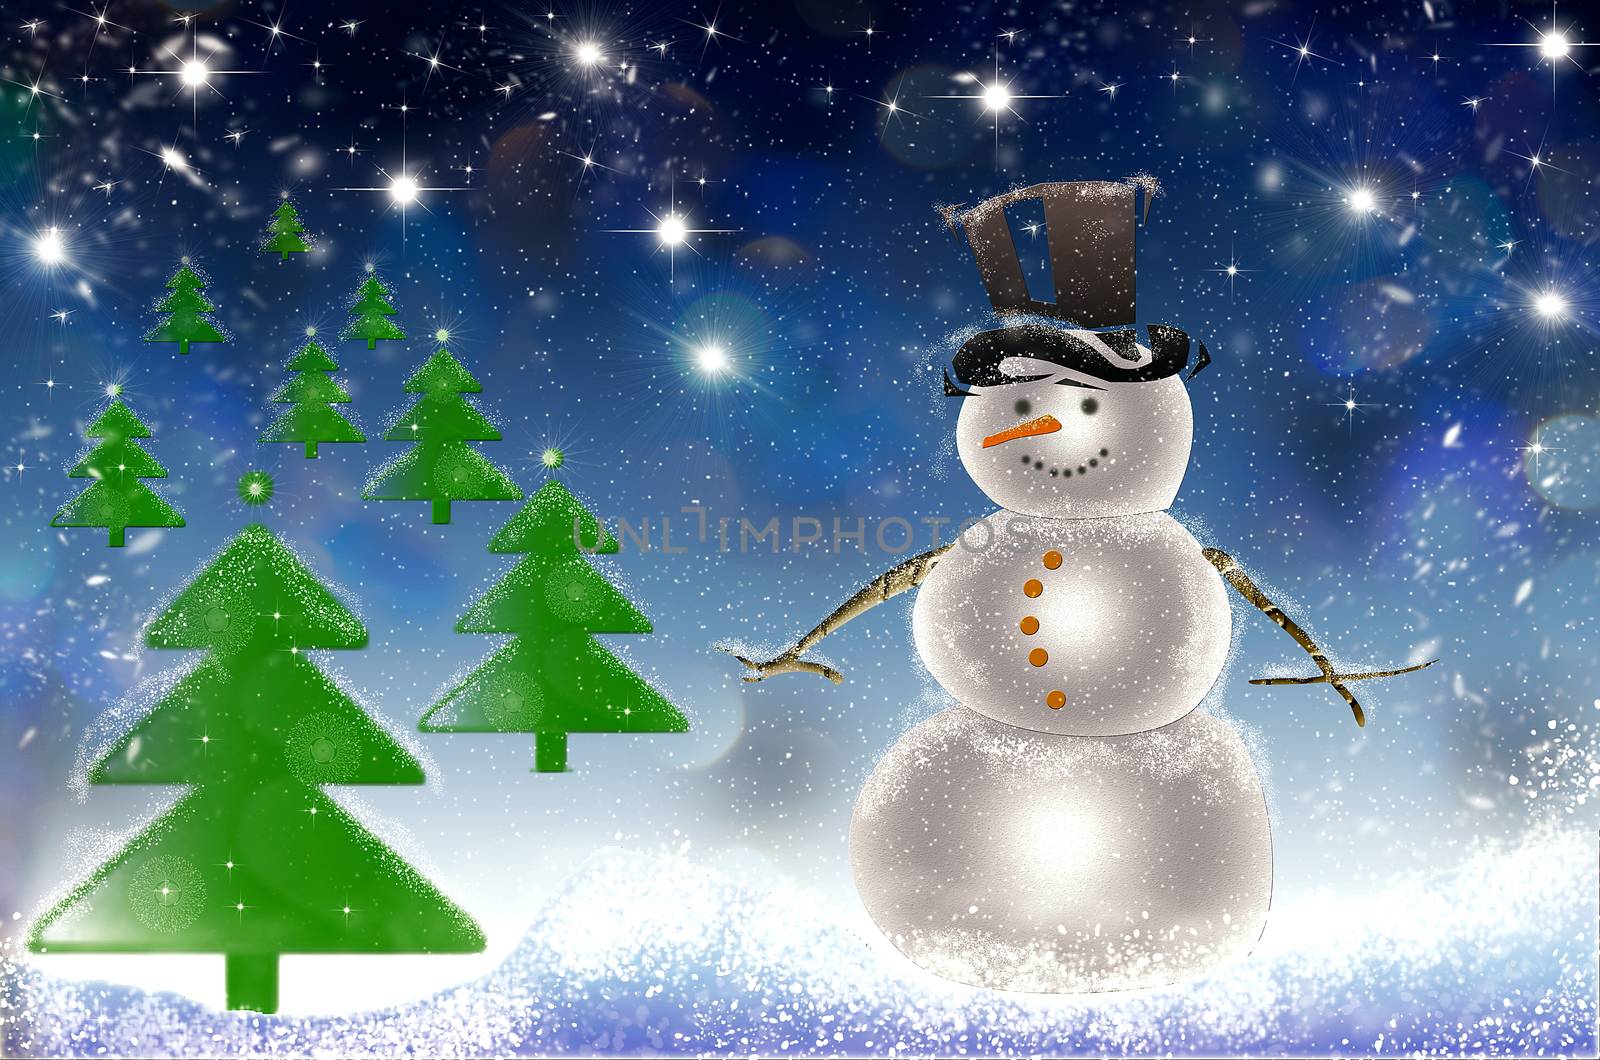 Christmas card with snowman, snow and fir trees. Snowy night with stars, snowman, falling snow, snowflakes, snowdrift for winter and new year holidays. Stock illustration